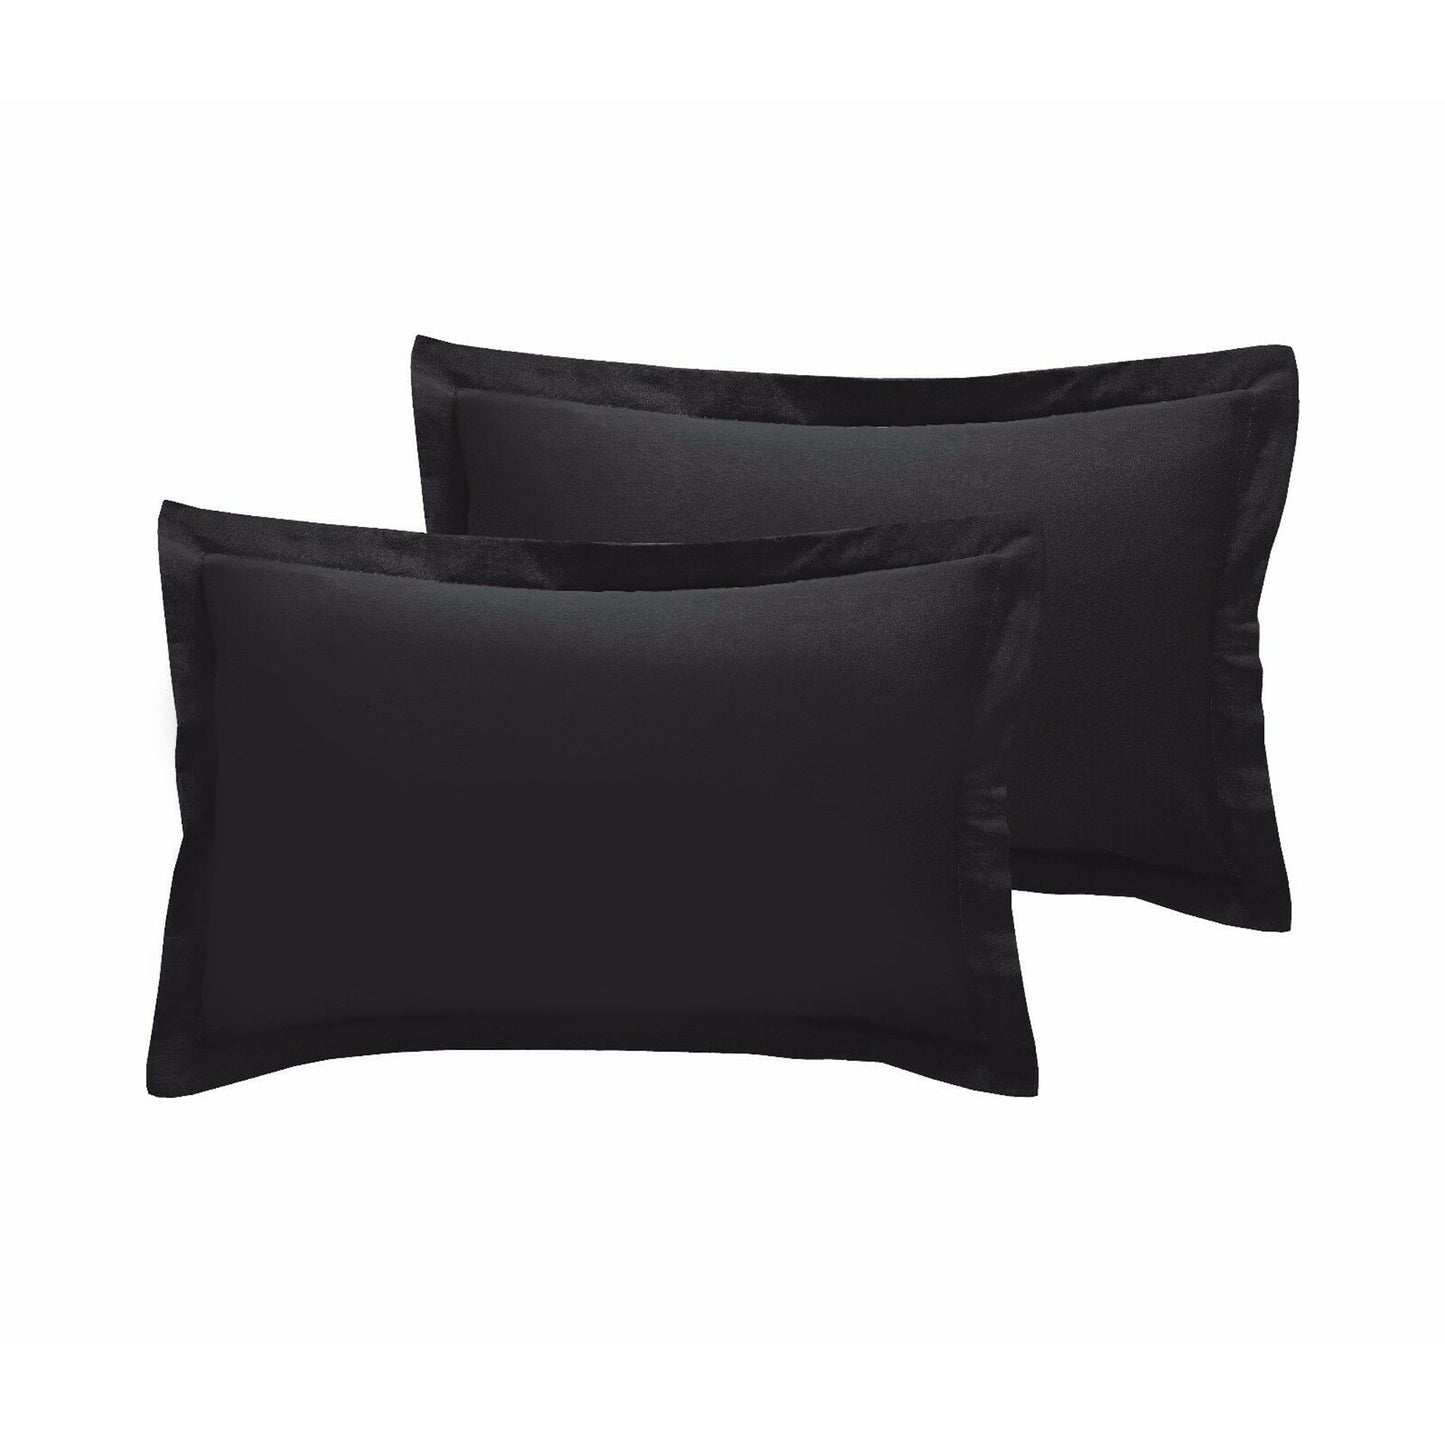 Egyptian Cotton Fitted Bed Sheet 16" Deep Or Pillowcase - TheComfortshop.co.ukBed Sheets0721718961178thecomfortshopTheComfortshop.co.ukBlack T200 Pillowcase Pair NZBlackPillowcase Pair OnlyEgyptian Cotton Fitted Bed Sheet 16" Deep Or Pillowcase - TheComfortshop.co.uk